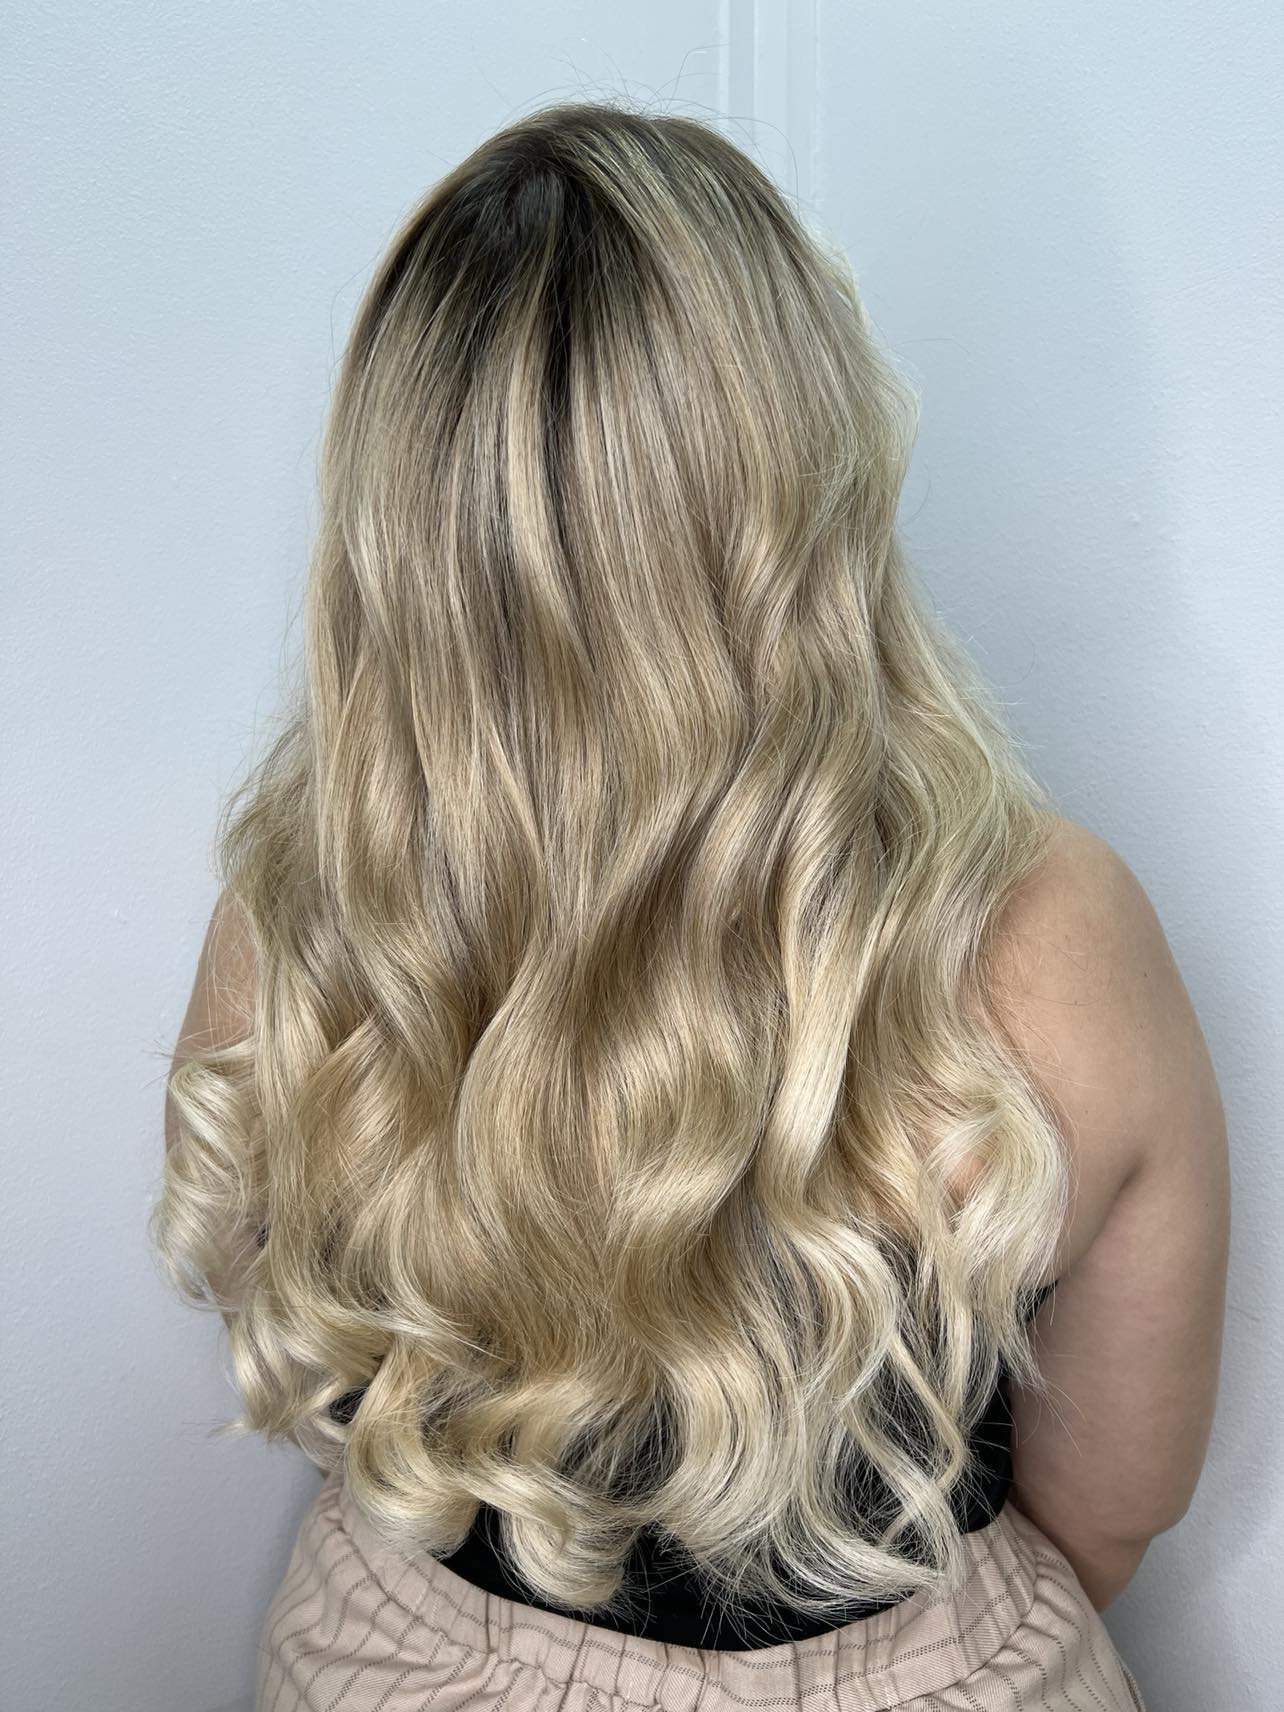 Great Lengths Platinum Awarded Salon in Peterborough